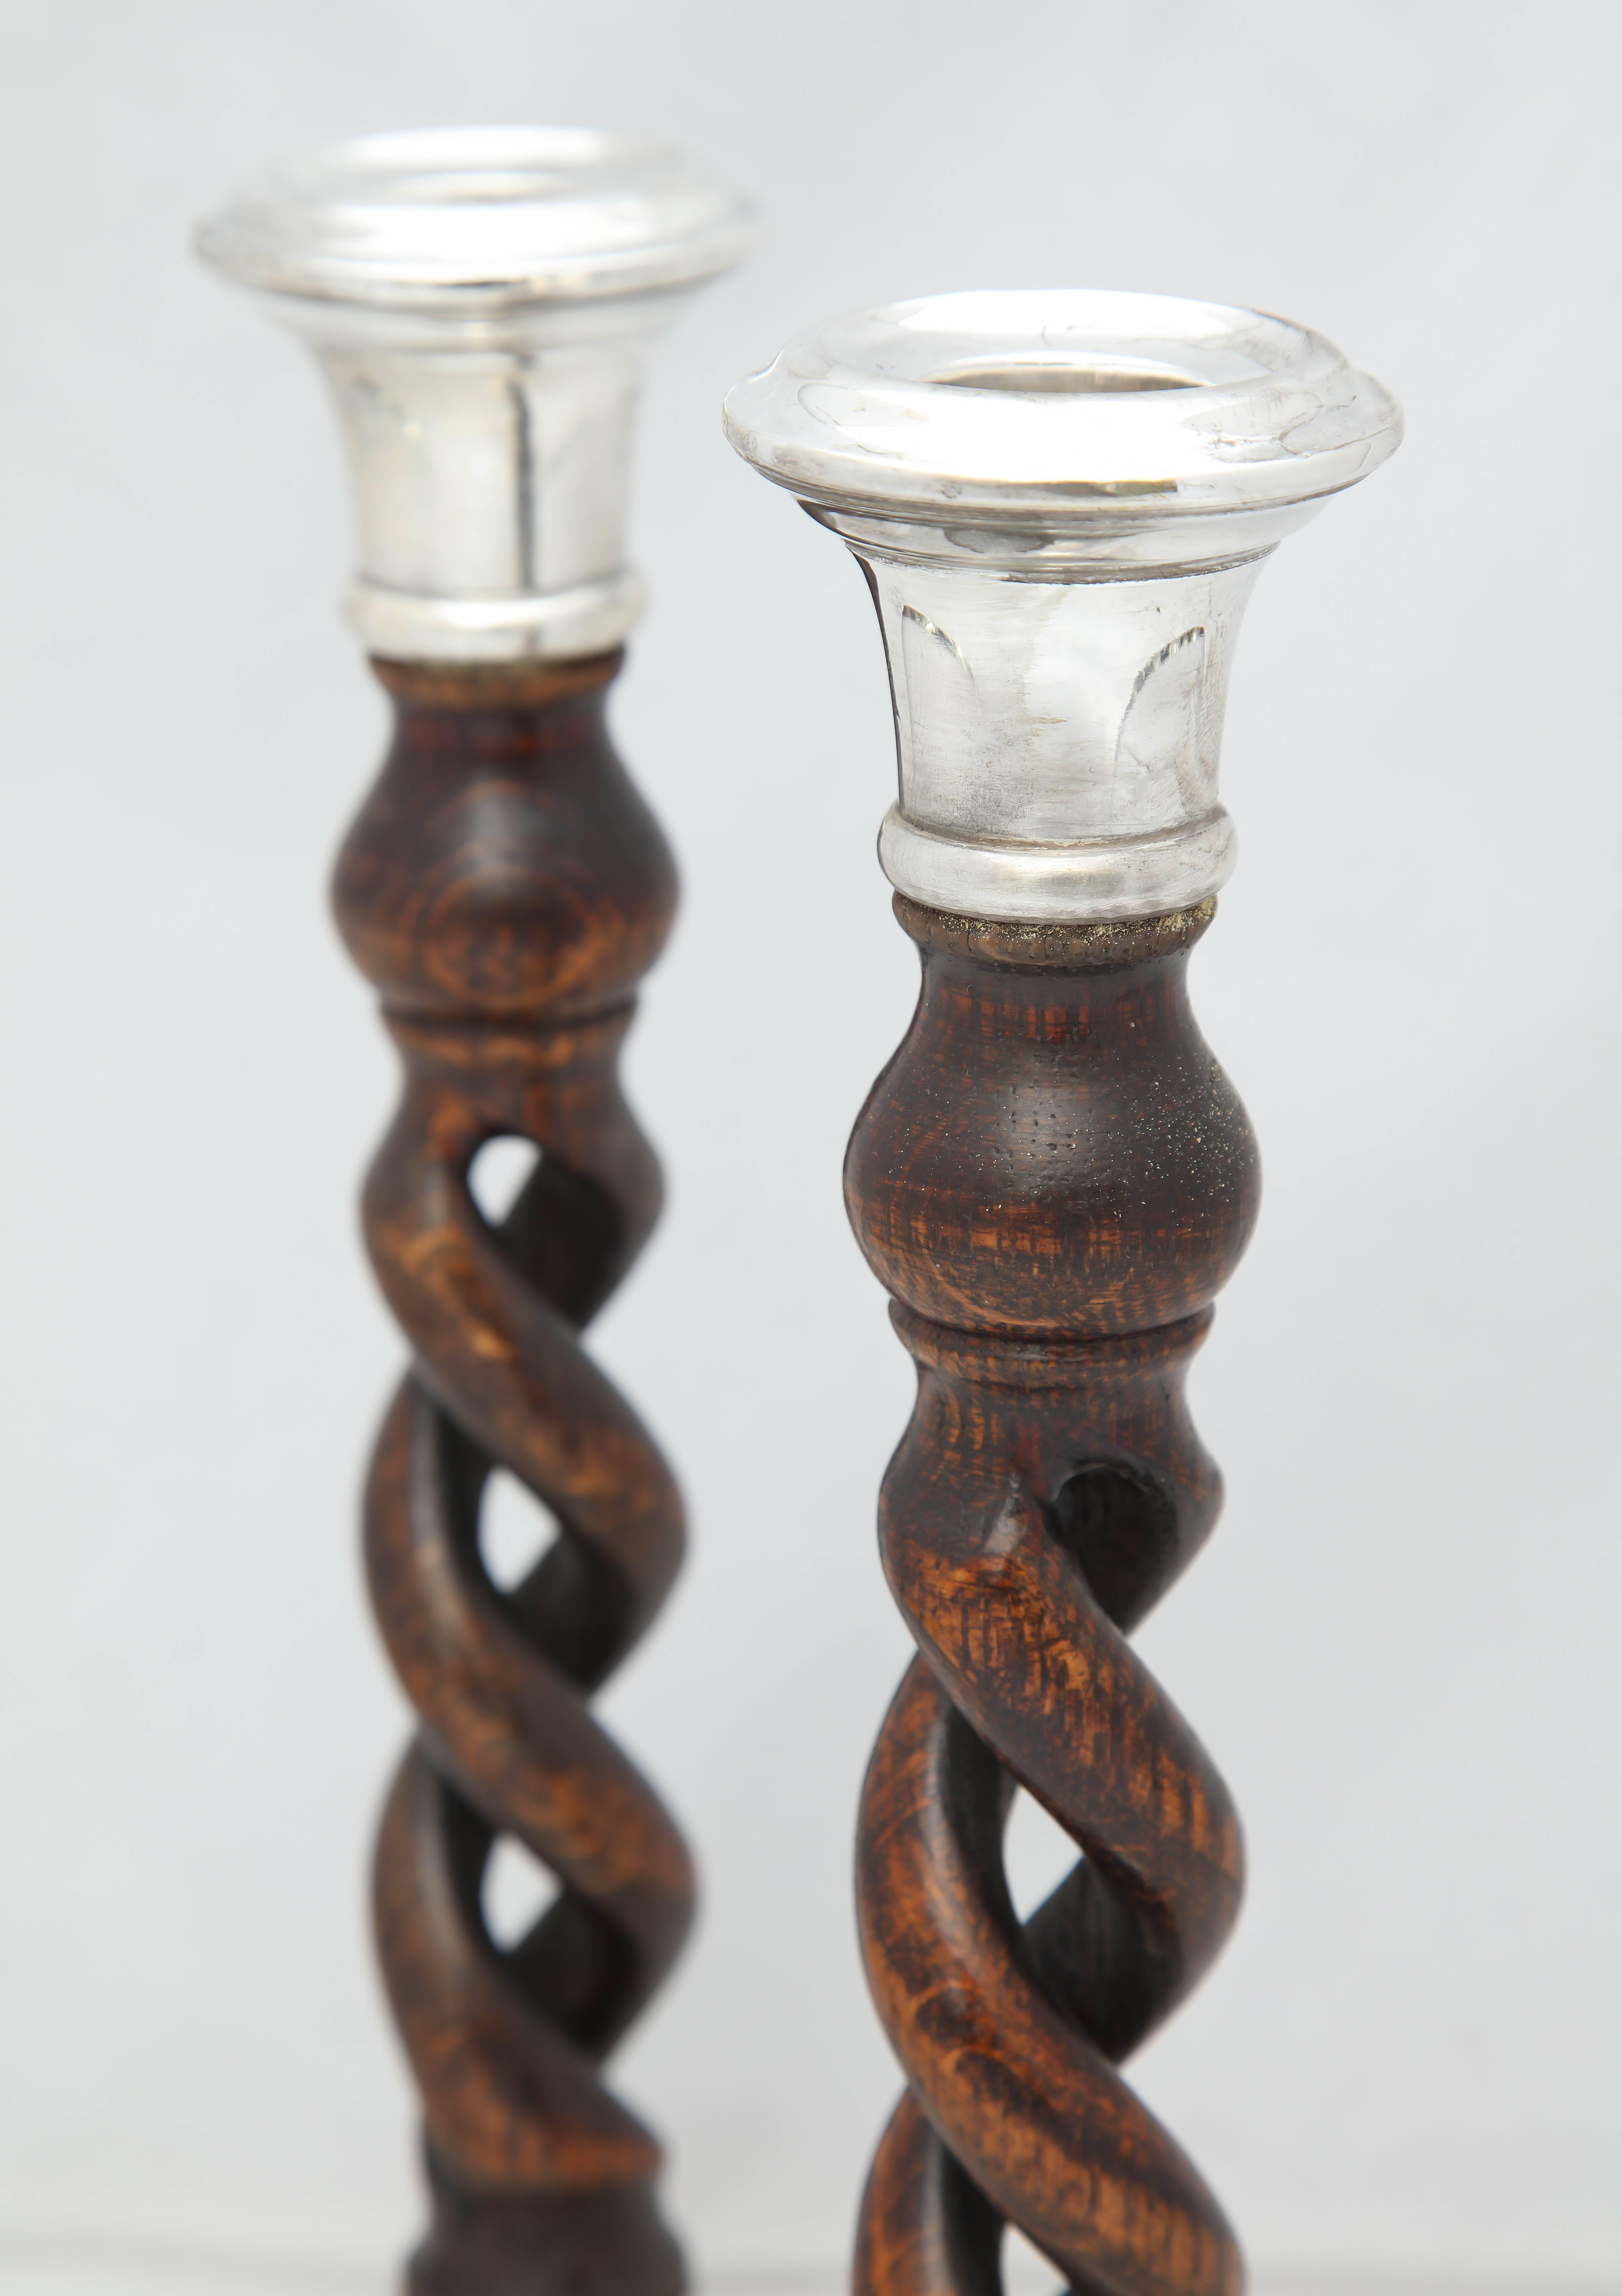 English Pair of Arts & Crafts Sterling Silver-Mounted Barley Twist Wood Candlesticks